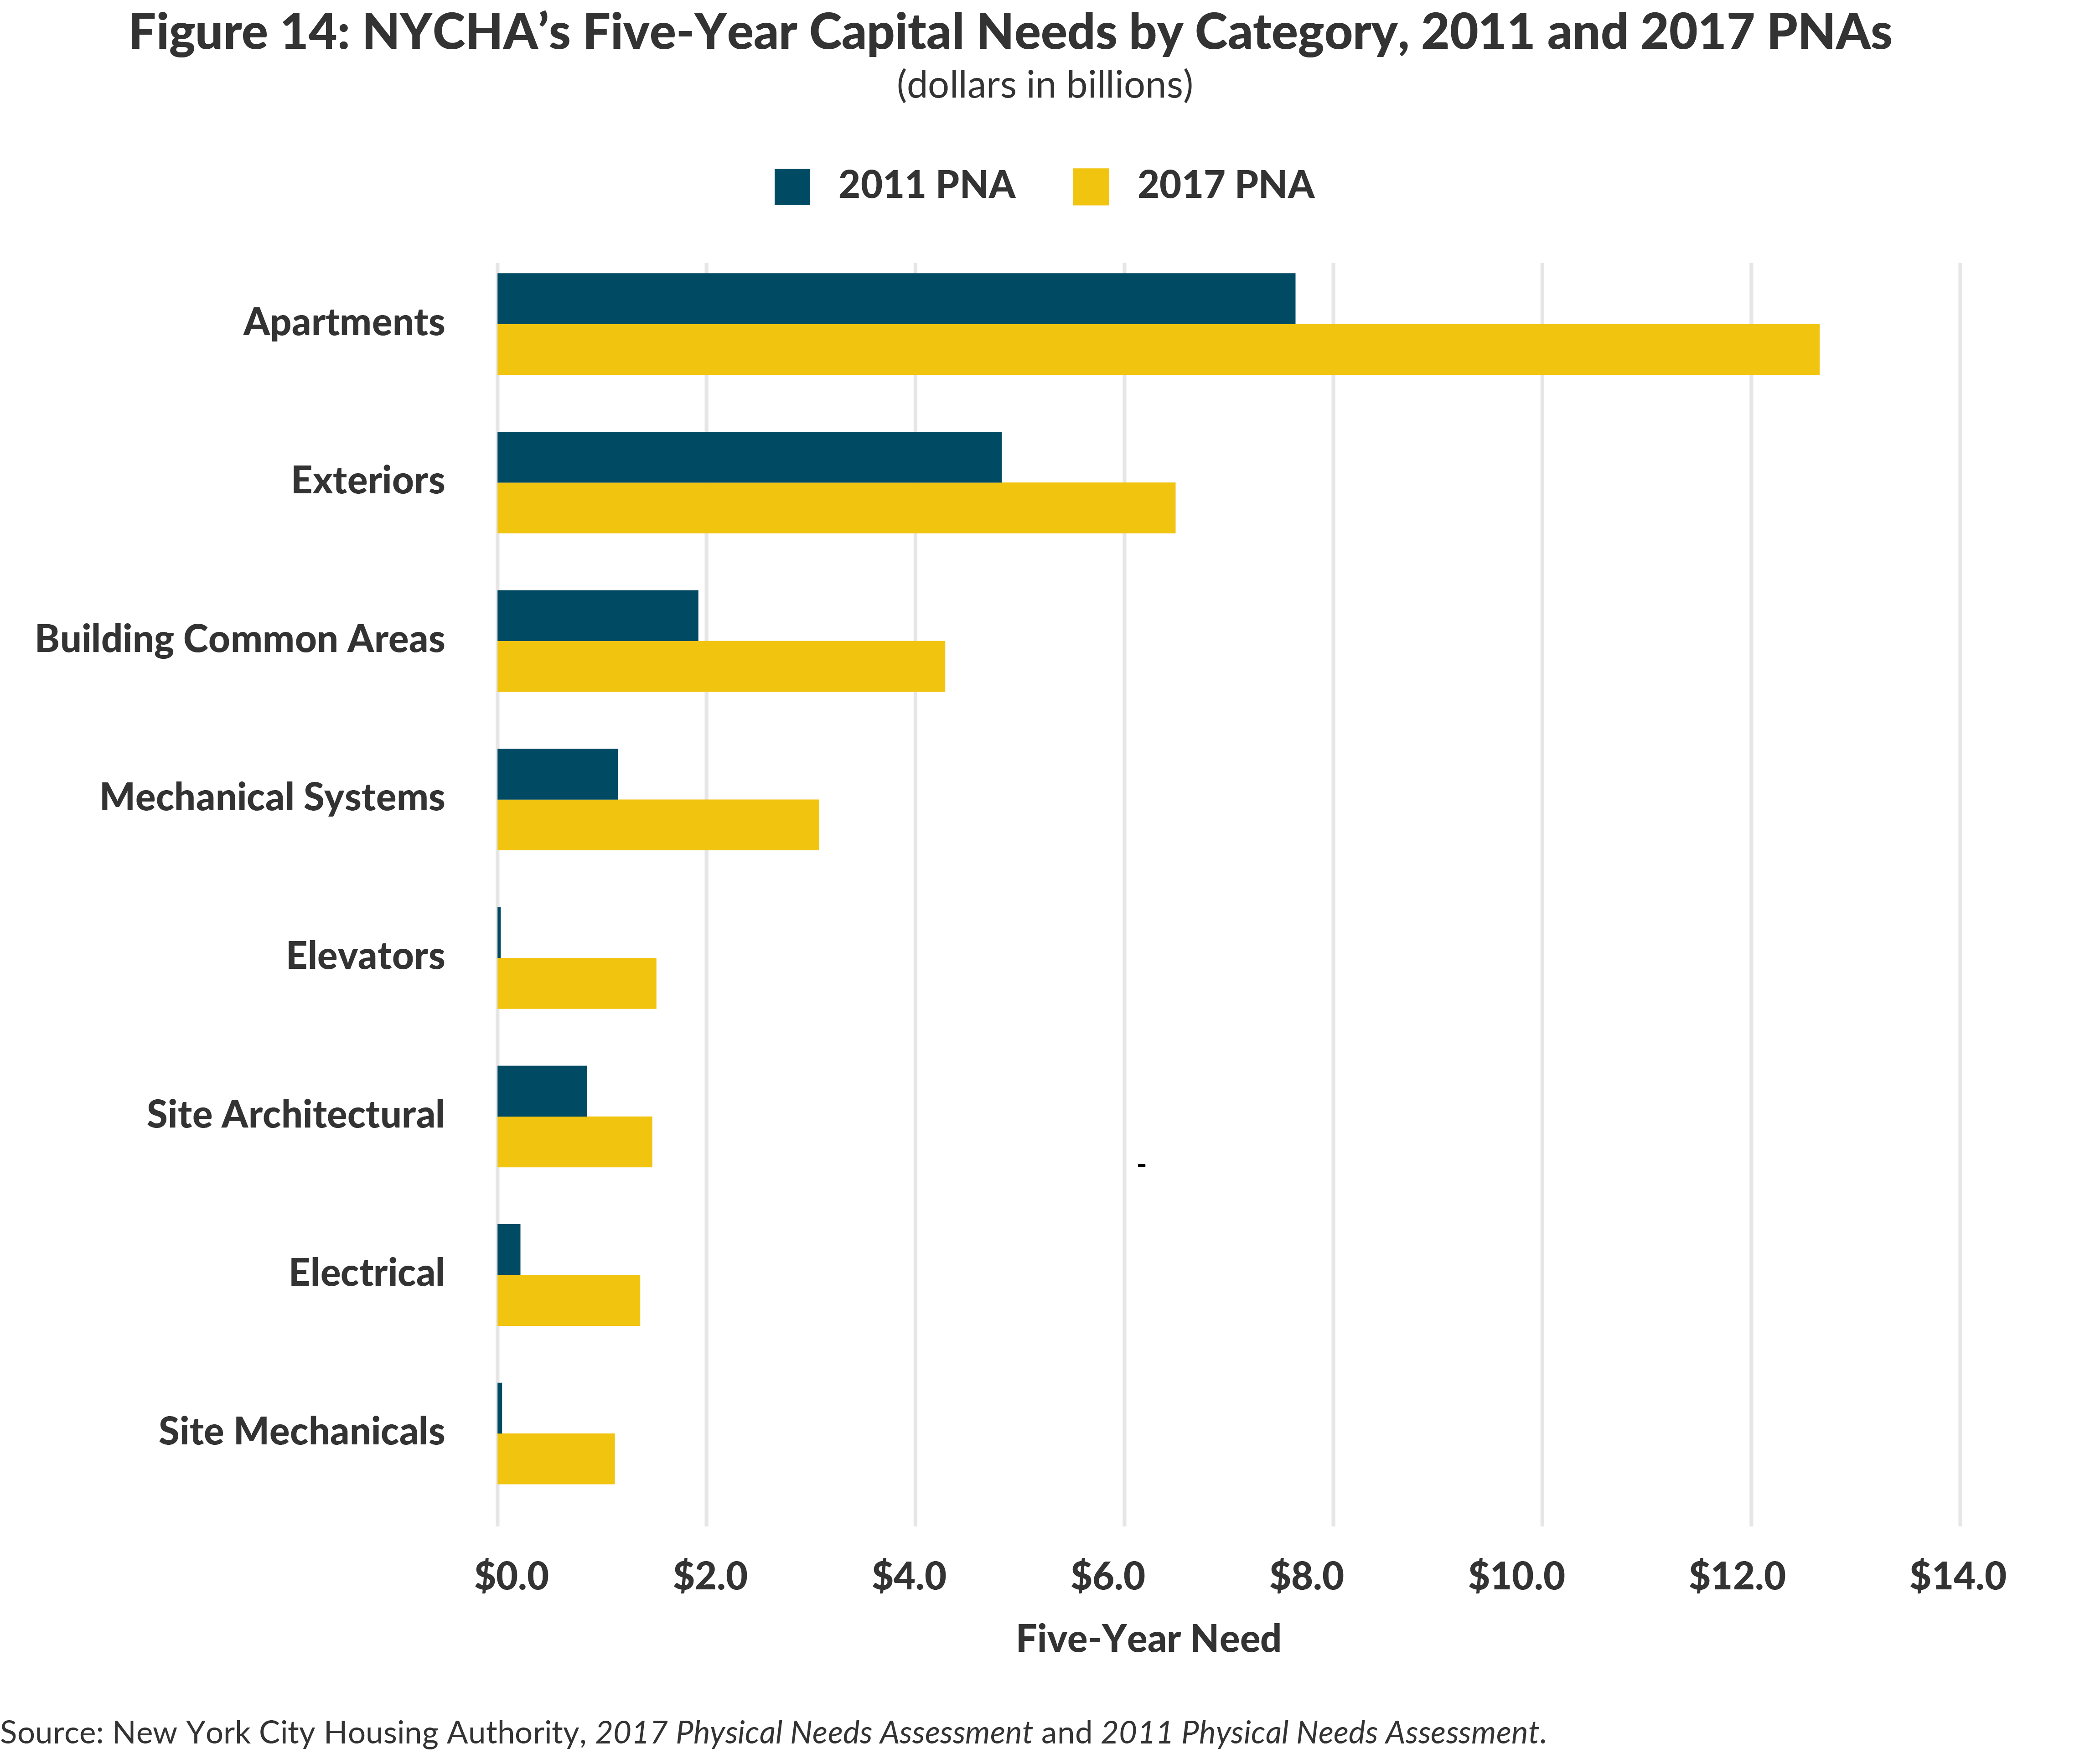 Figure 14: NYCHA’s Five-Year Capital Needs by Category, 2011 and 2017 PNAs